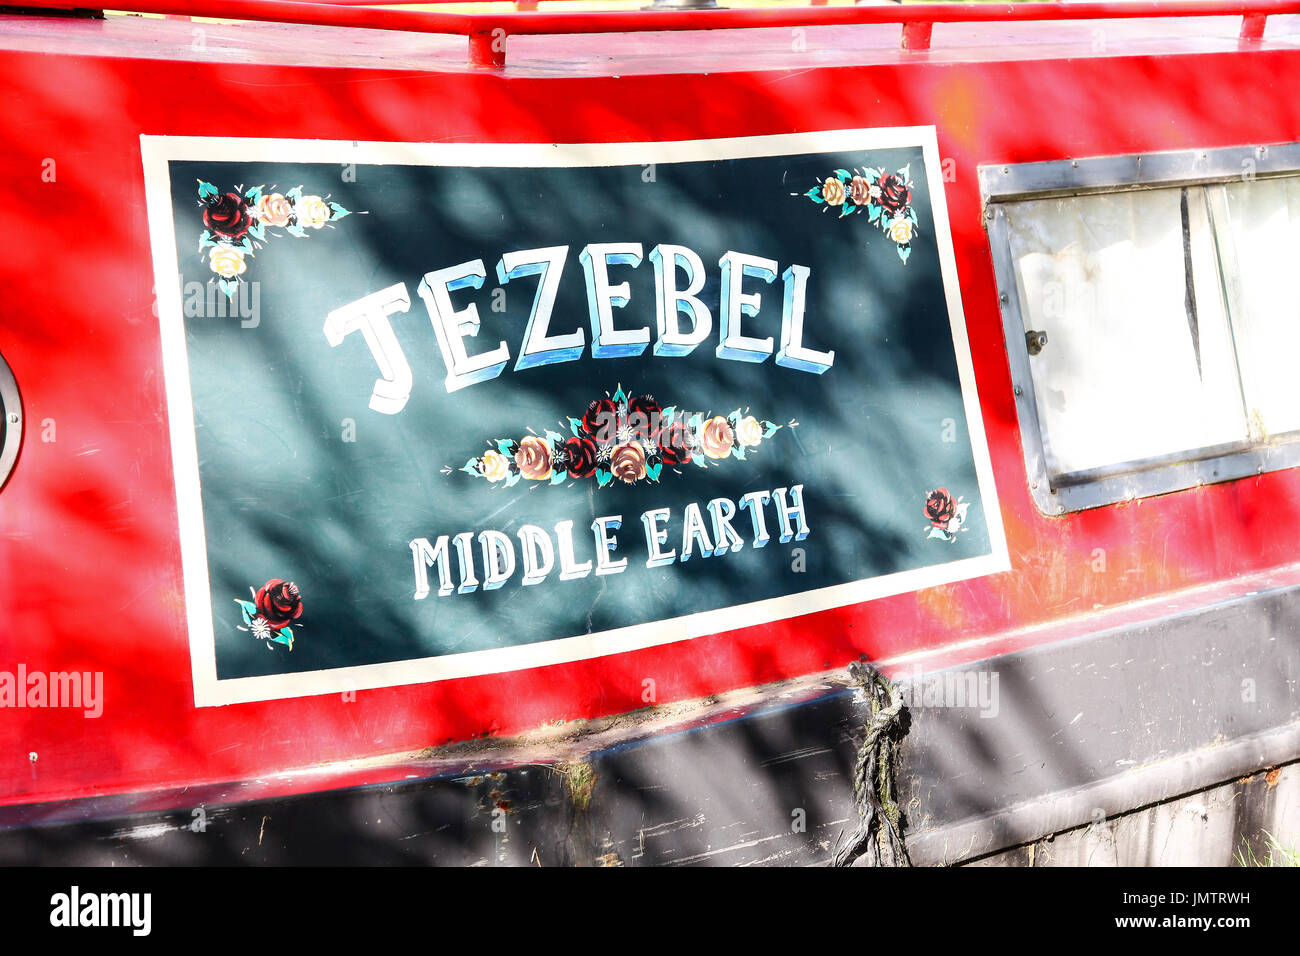 An ornate painted name board on a narrow boat or canal barge called 'Jezebel' from 'middle earth' Stock Photo